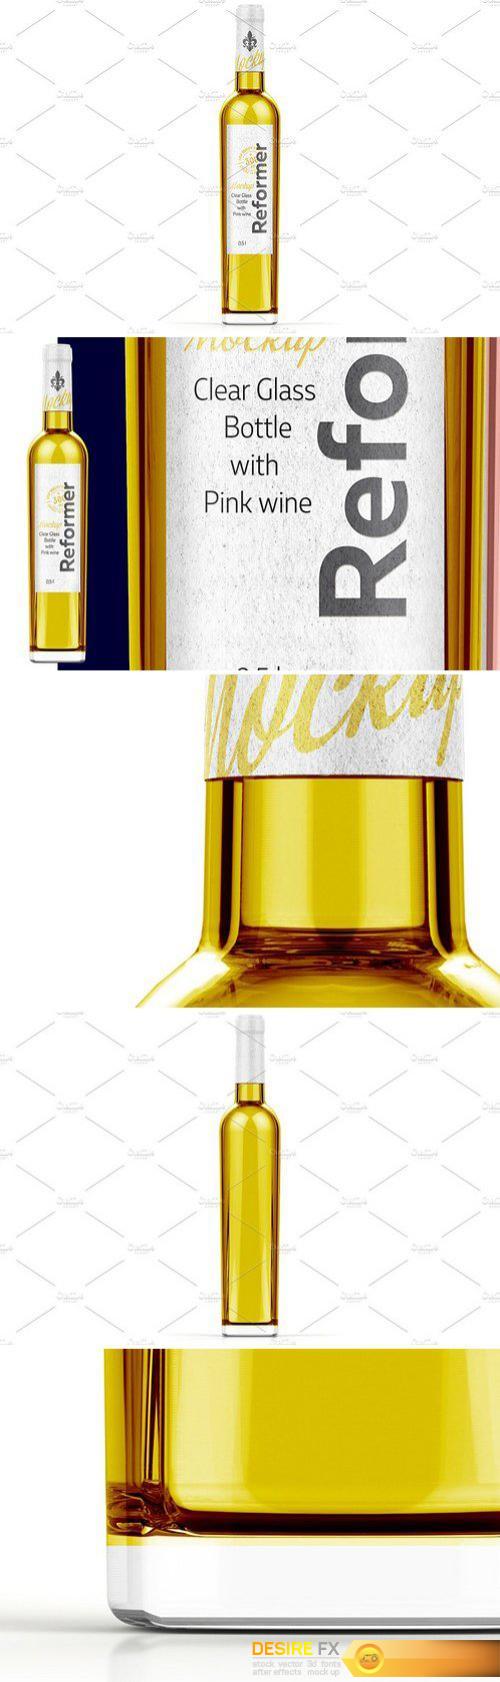 CM - Glass Bottle with White wine Mockup 2120644